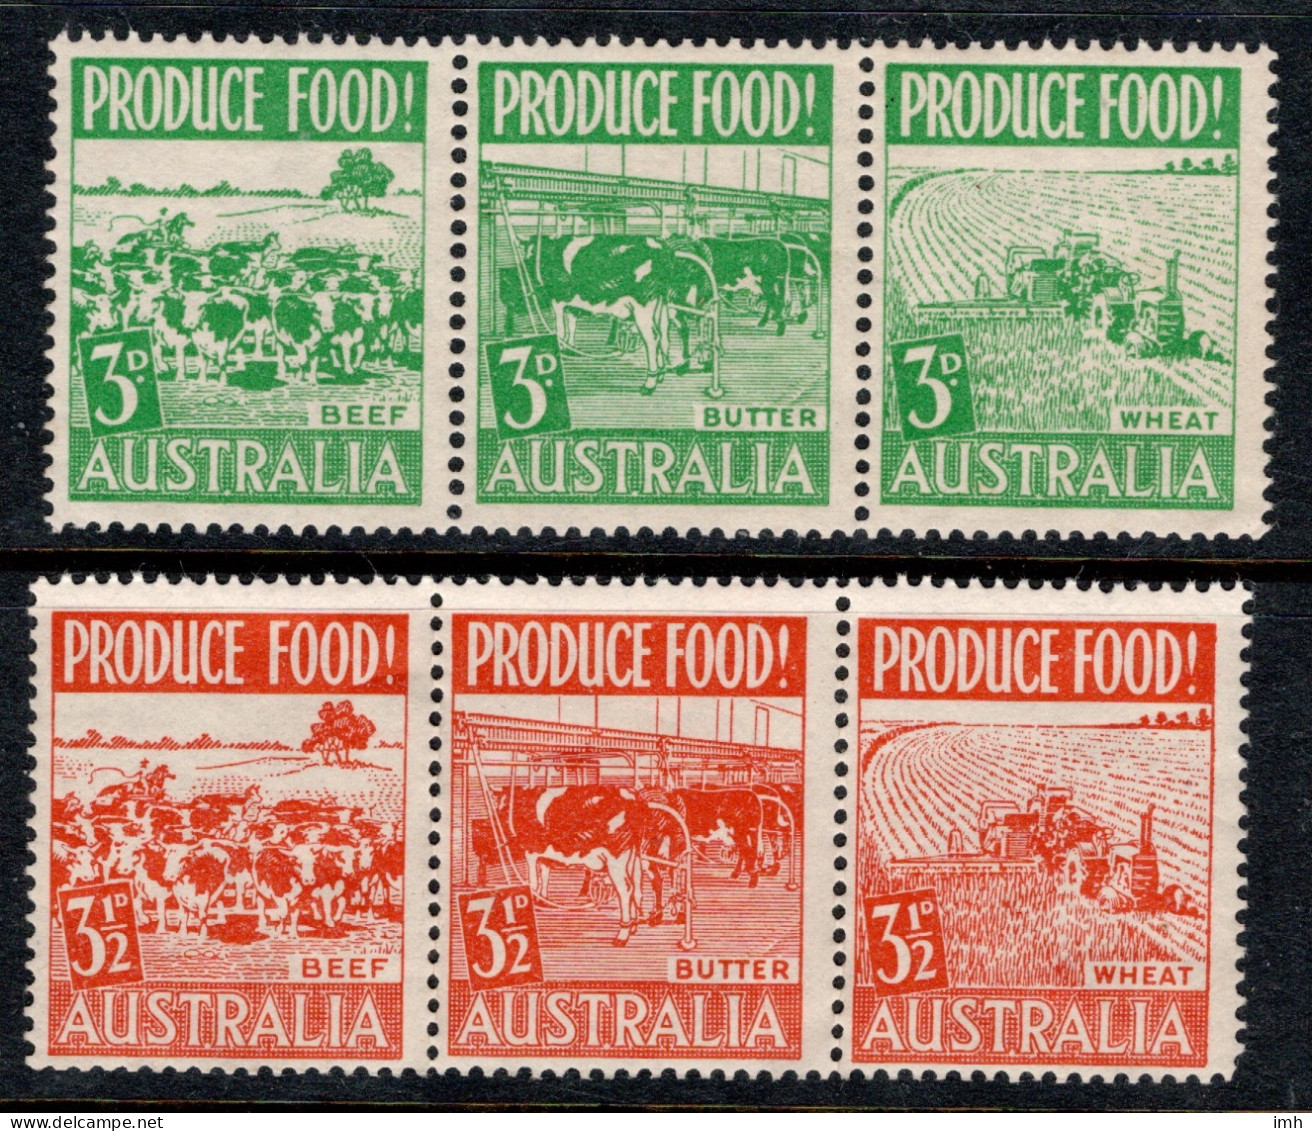 1953 Australia SG 255-260 Produce Food In Strips Of Three Complete Set , Mint Unhinged MUH Cat £3.00 - Neufs